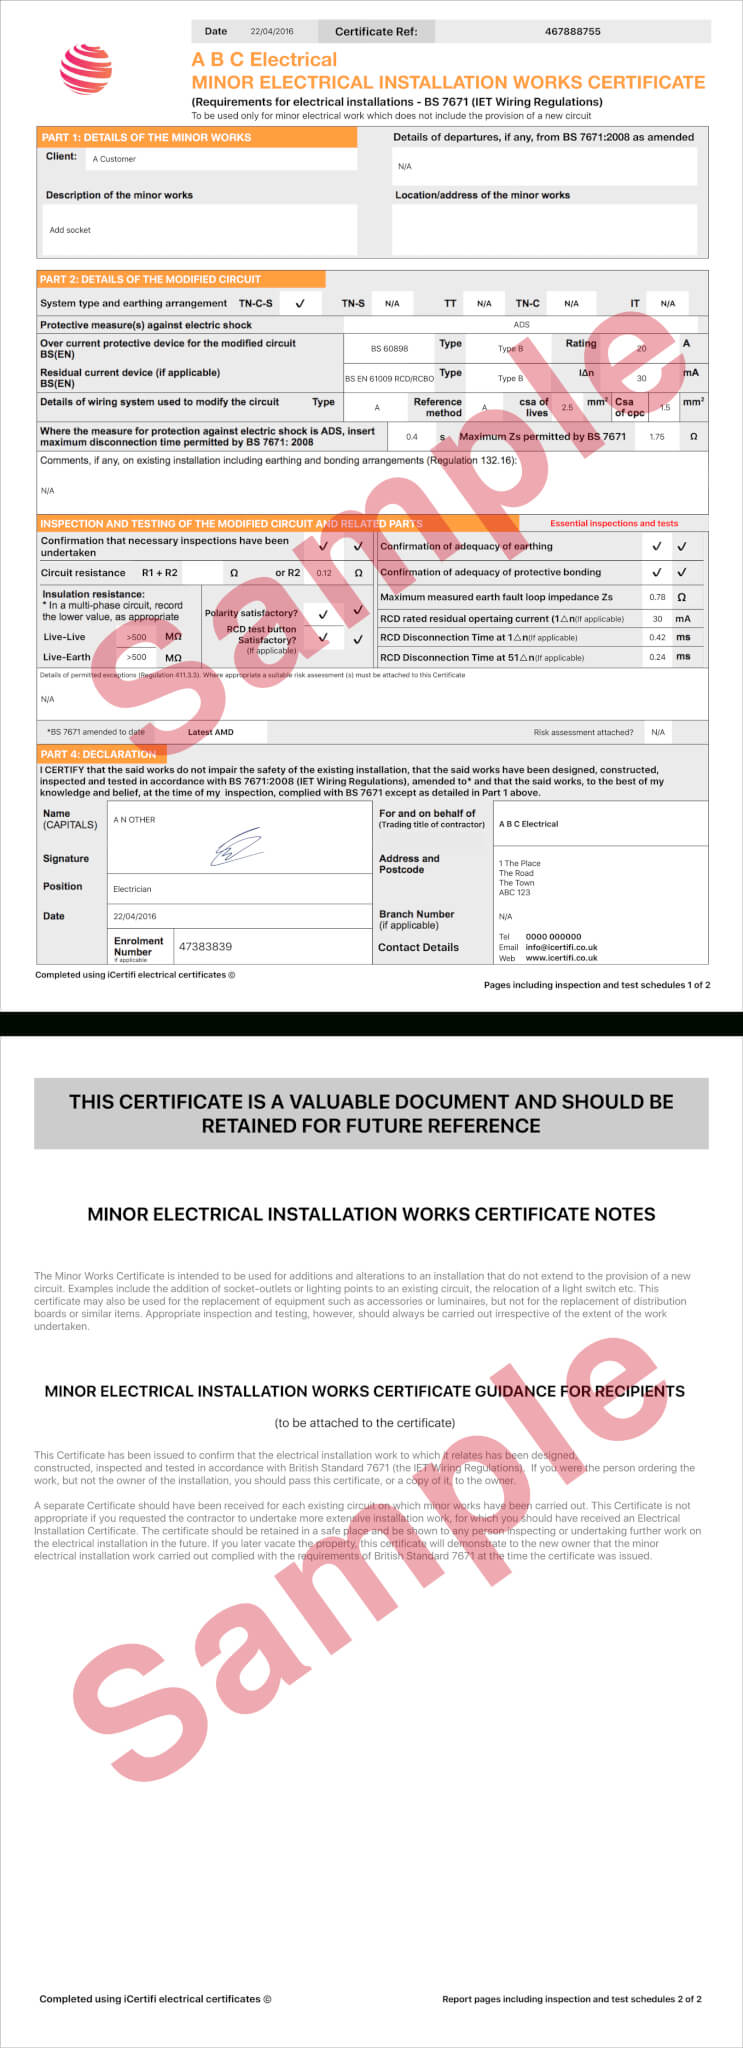 Electrical Certificate – Example Minor Works Certificate In Minor Electrical Installation Works Certificate Template